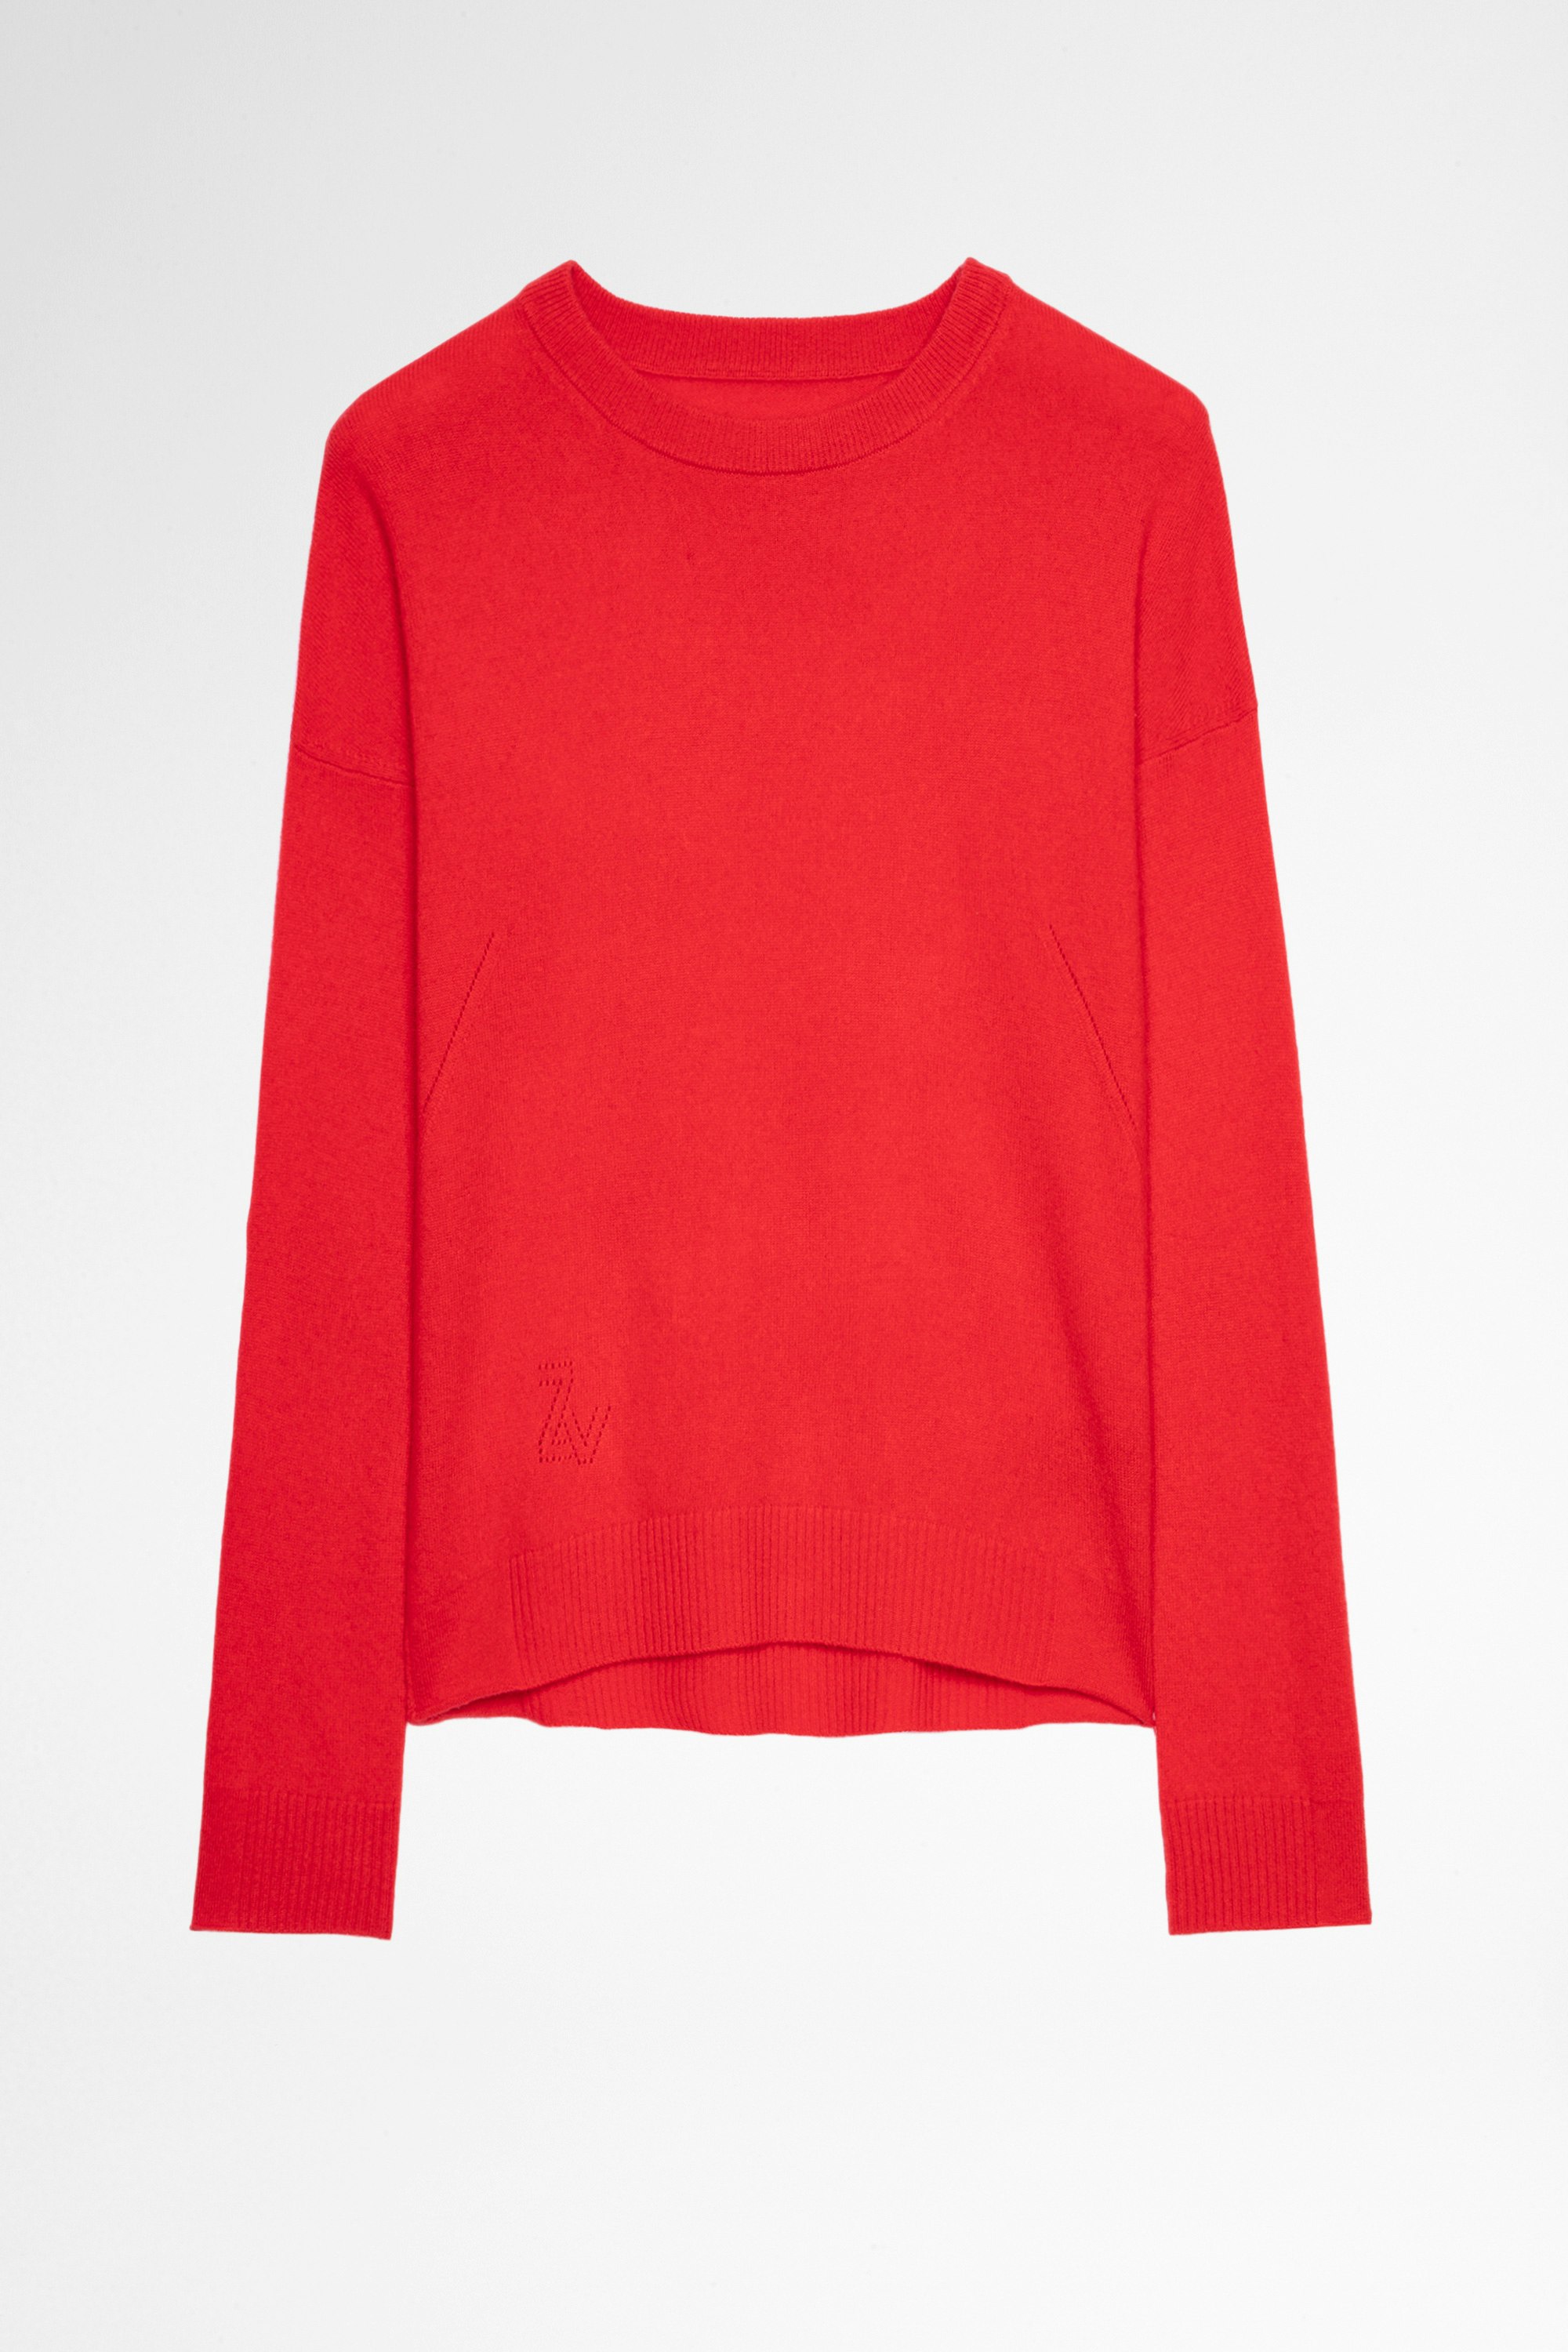 Cici Patch Cashmere Jumper Women's red cashmere jumper with star patches on elbows